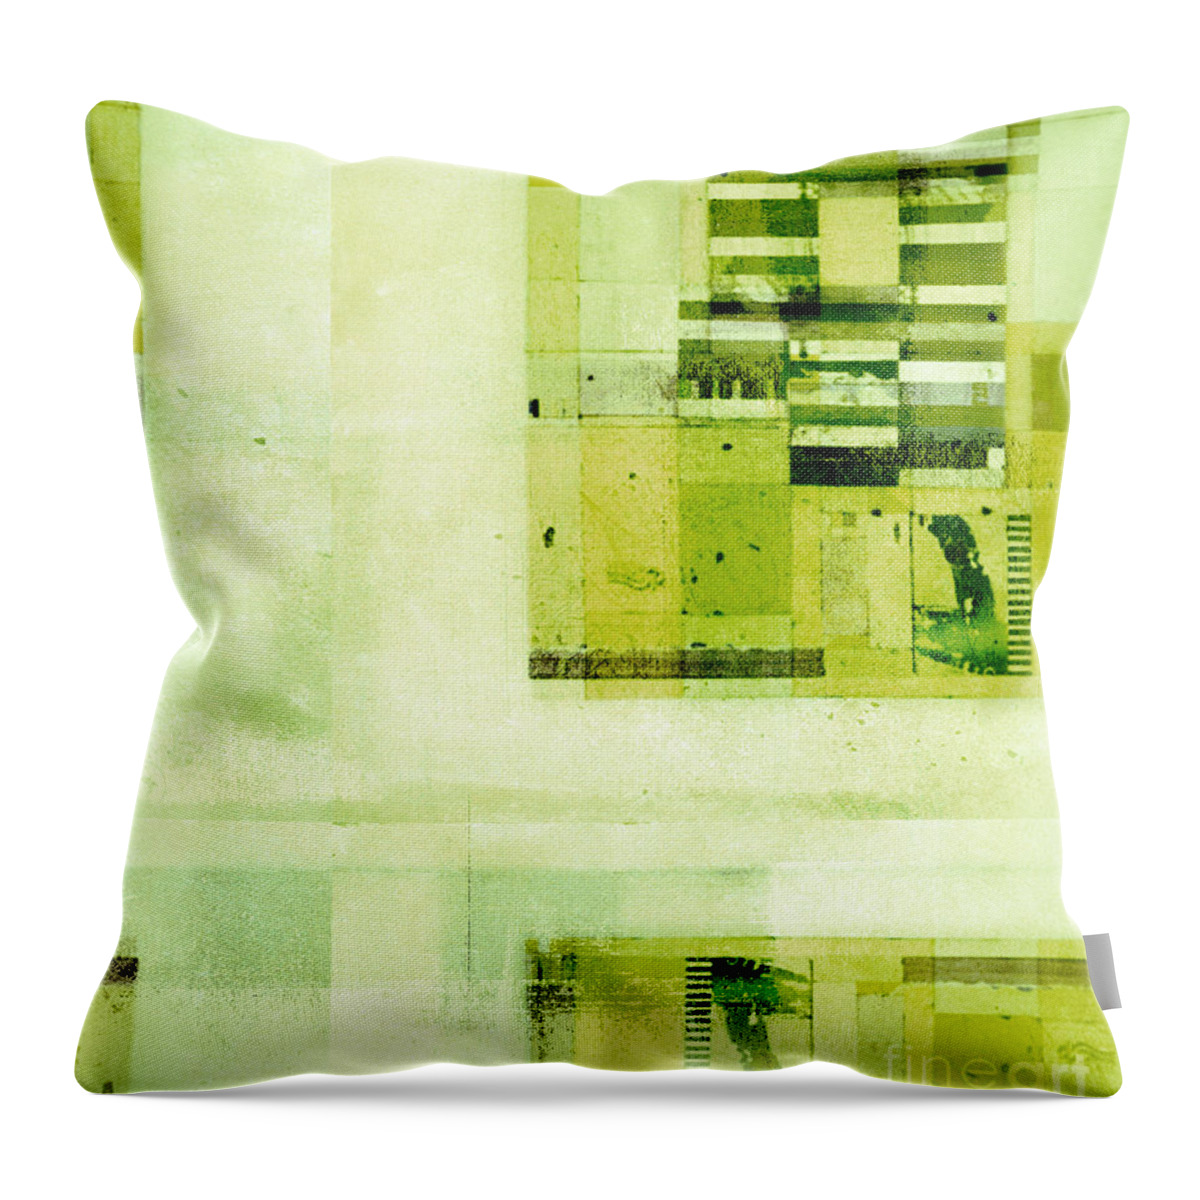 Abstract Throw Pillow featuring the digital art Abstractitude - c4v by Variance Collections